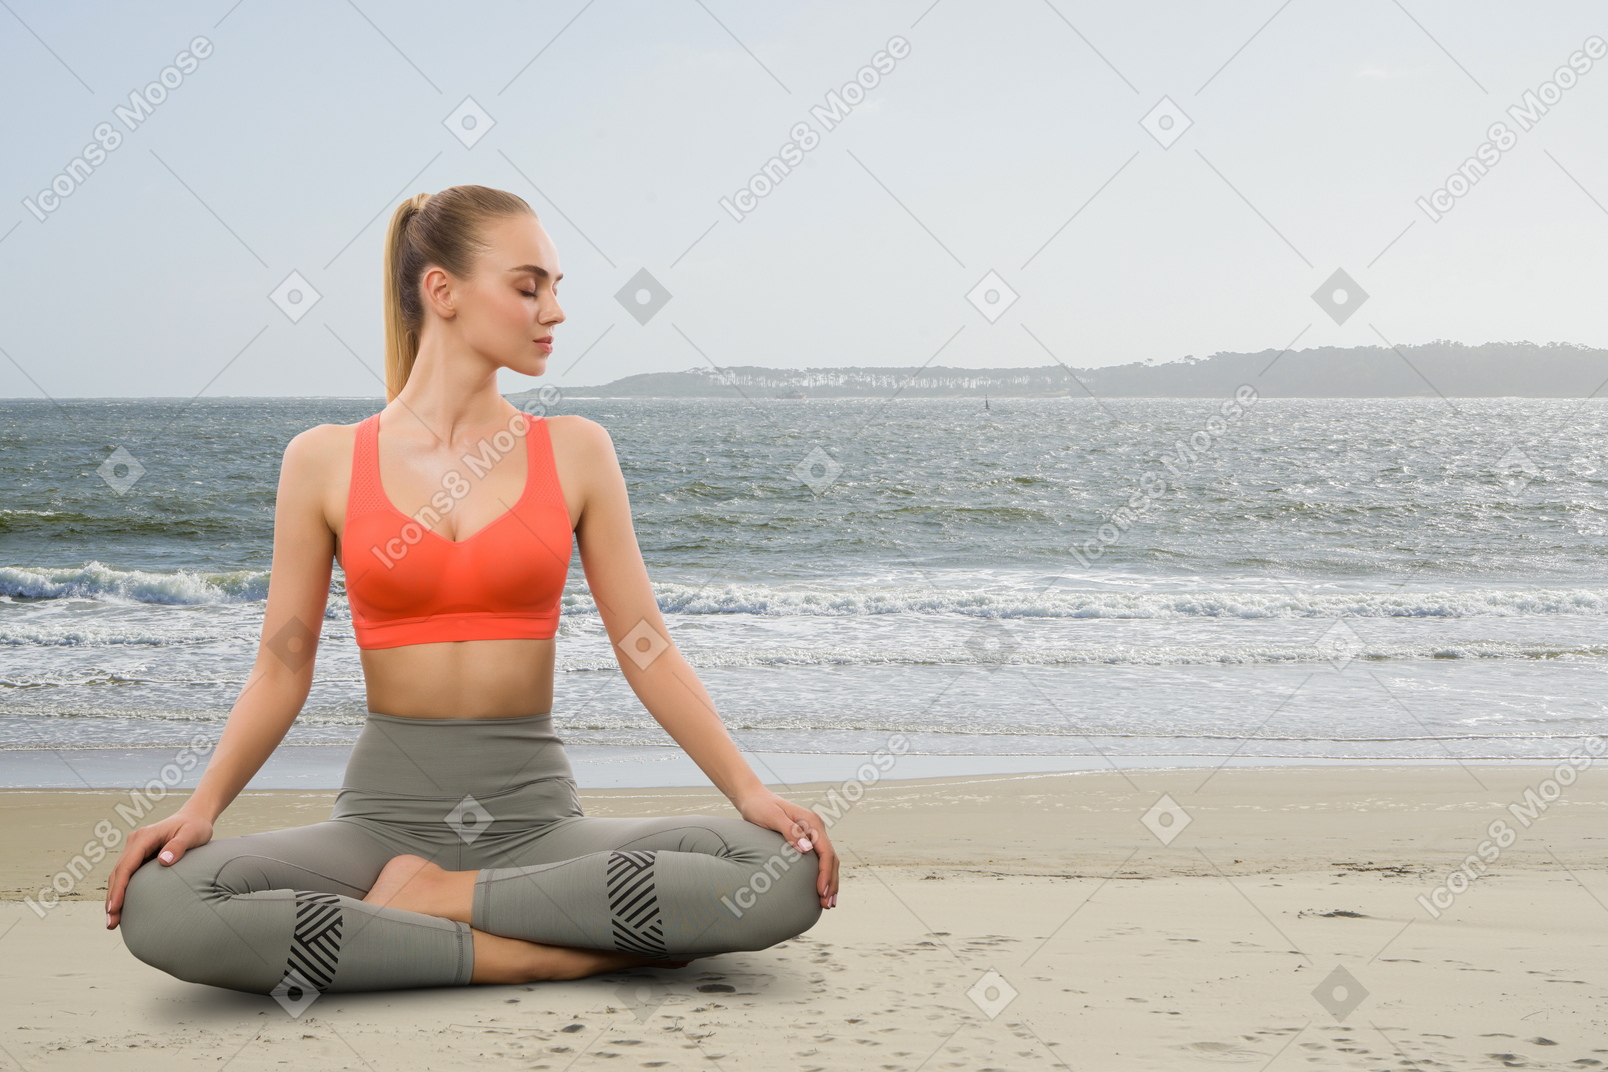 A woman sitting in a yoga position on the beach